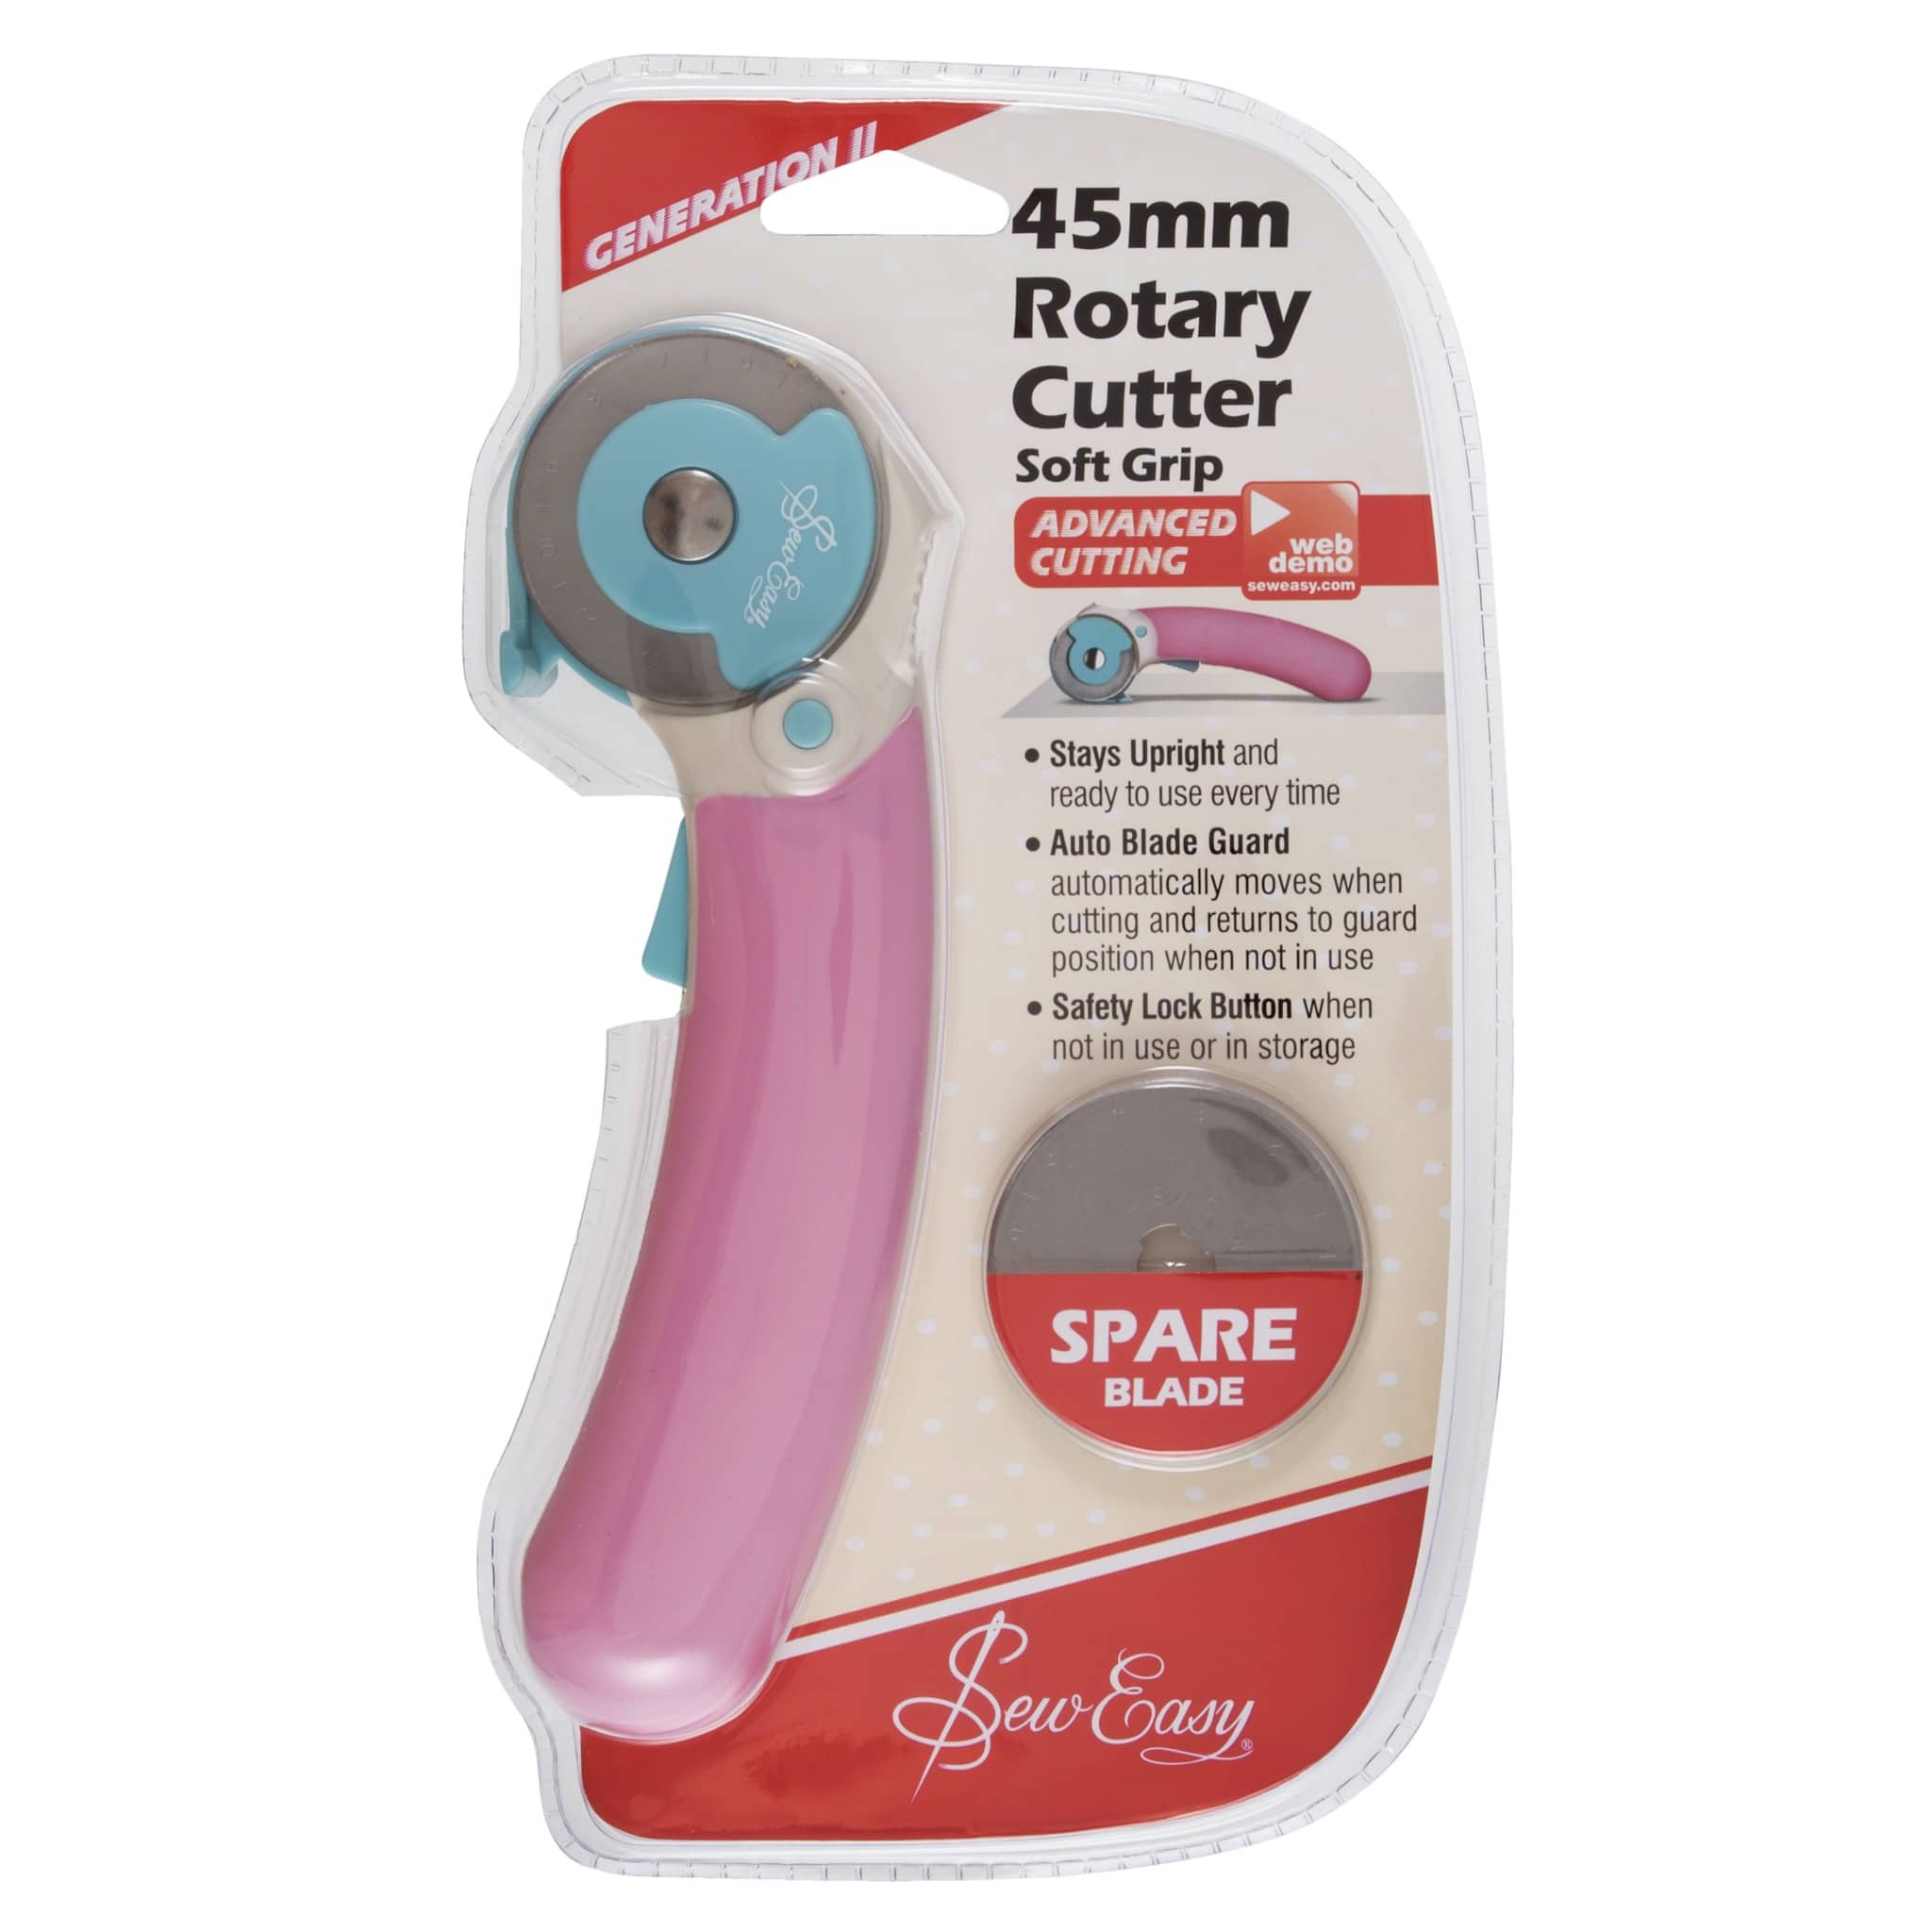 Sew Easy Rotary Cutter (45mm)